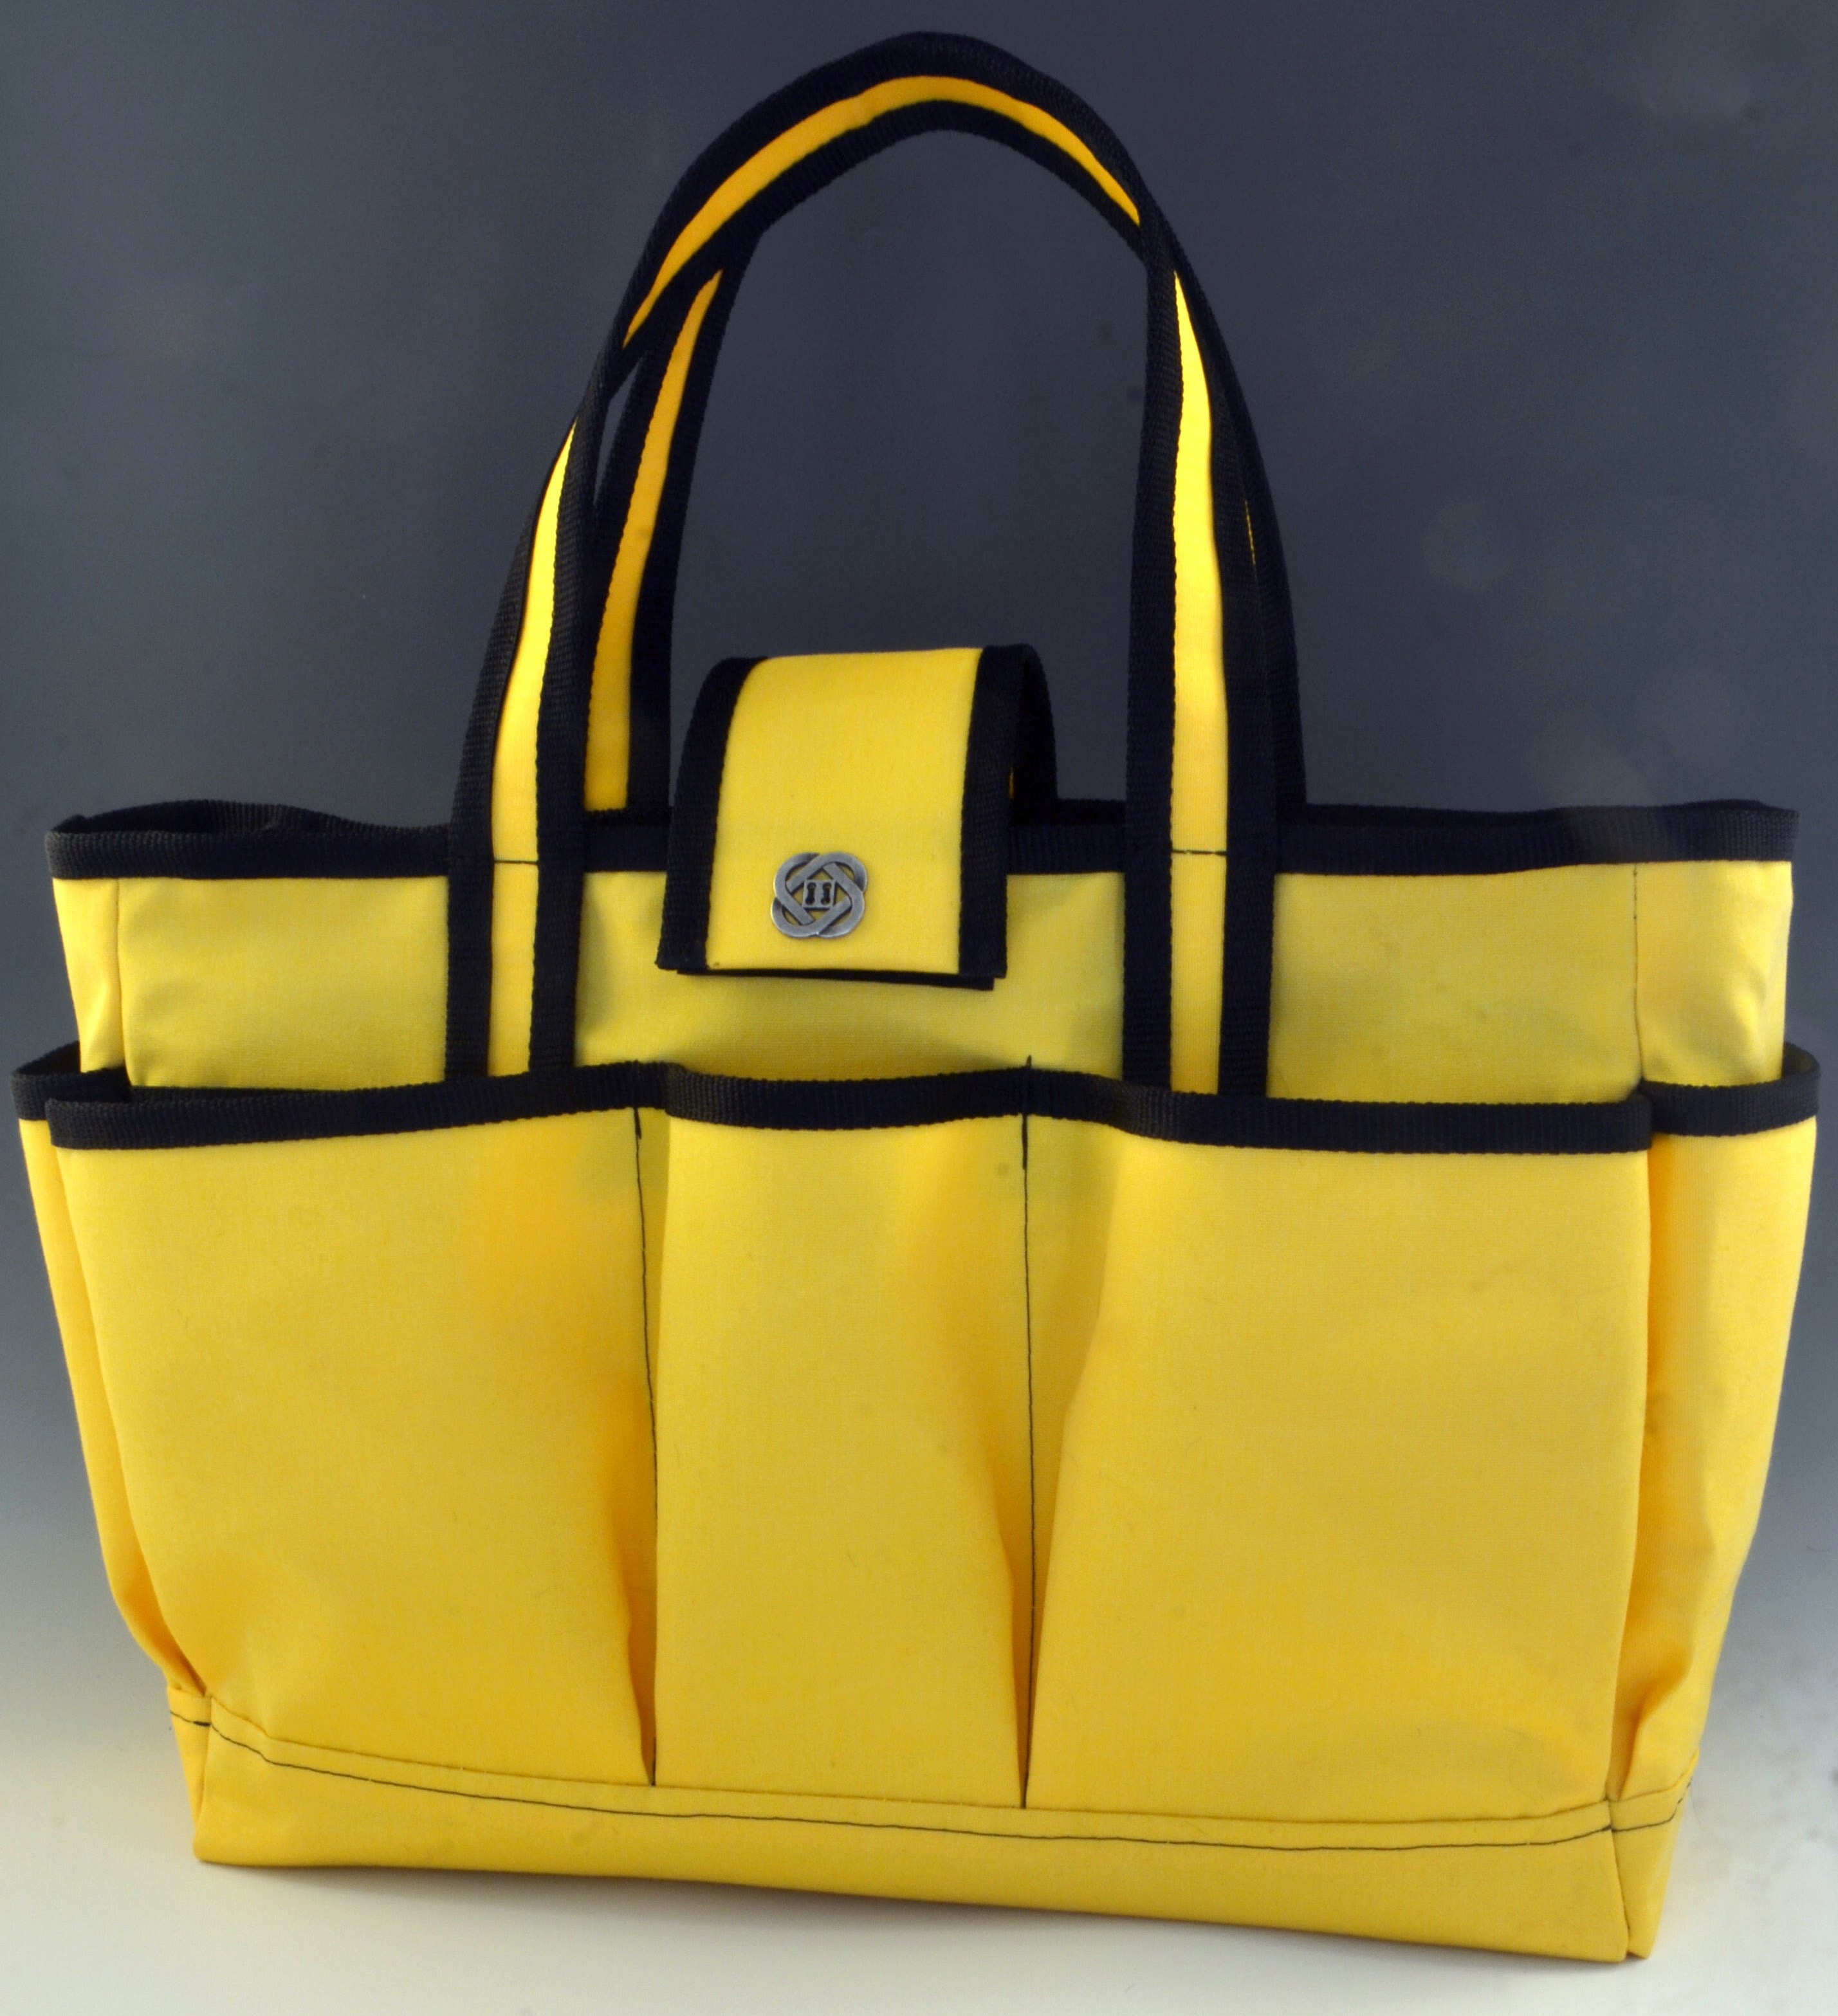 CLN - A handbag that fits all your needs! Crafted in nylon